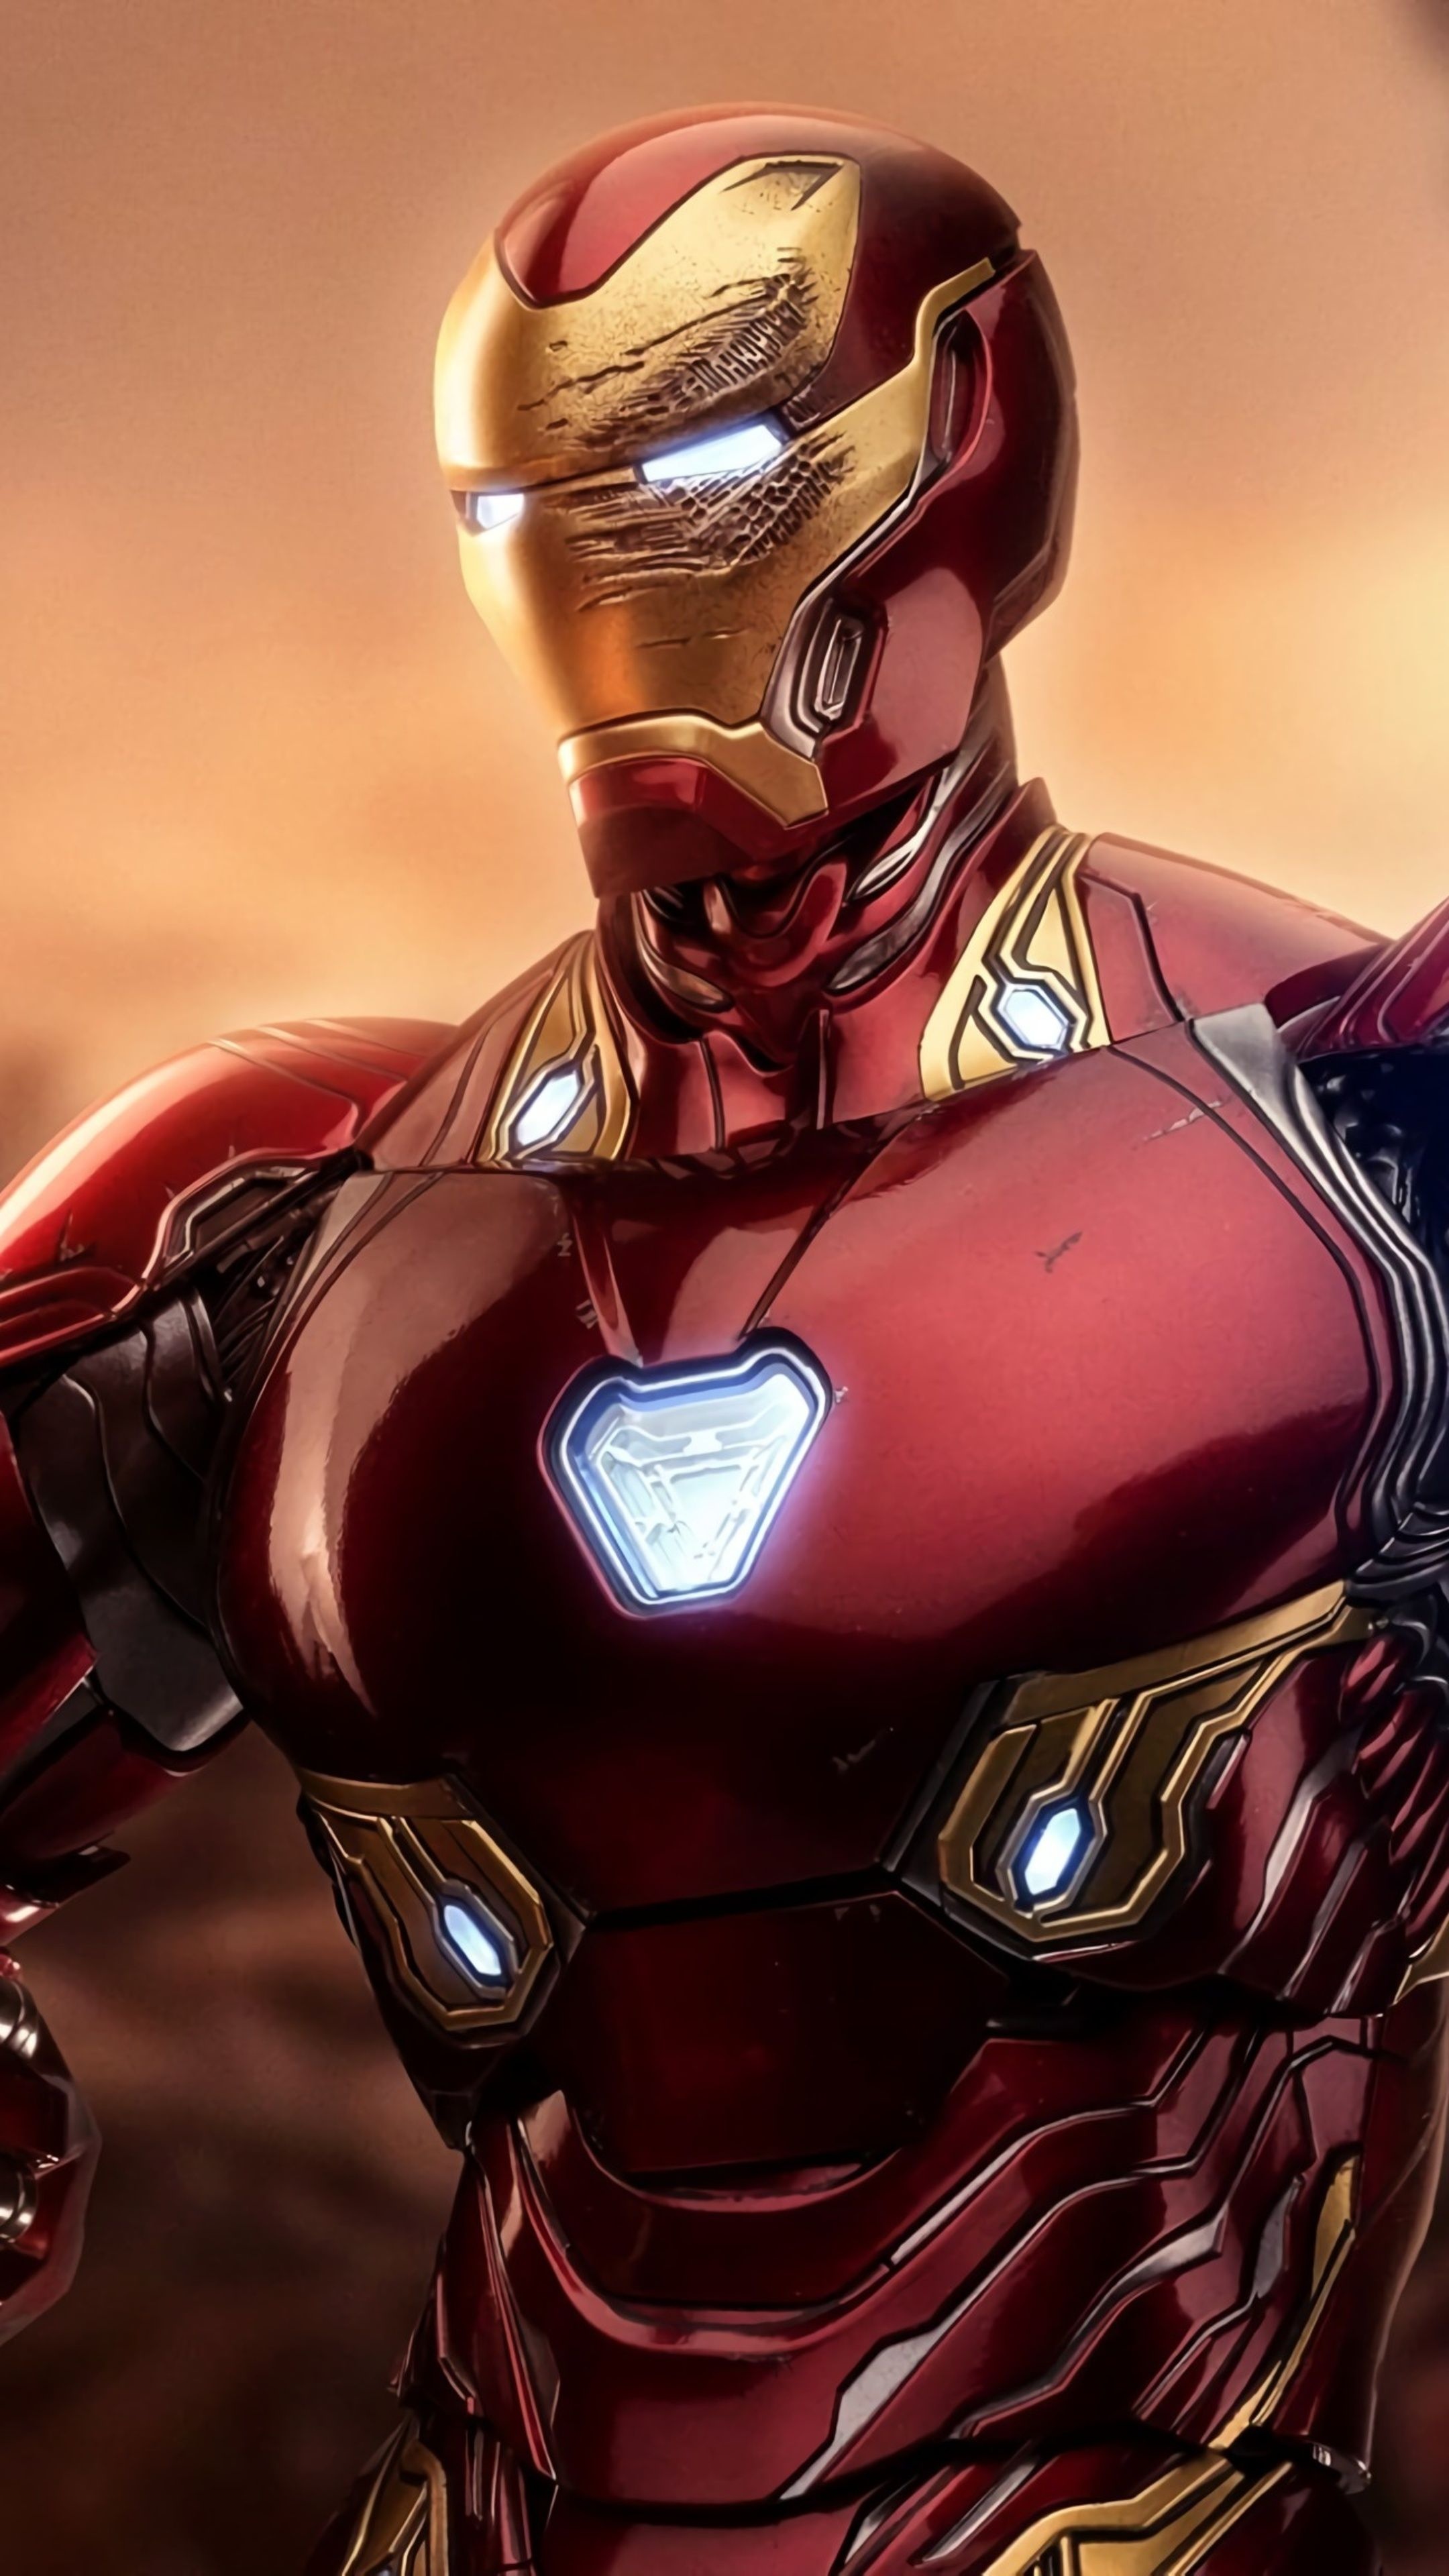 Iron Man: The character founded the Avengers superhero team with Thor, Ant-Man, Wasp and the Hulk, Mark 45 Suit. 2160x3840 4K Background.